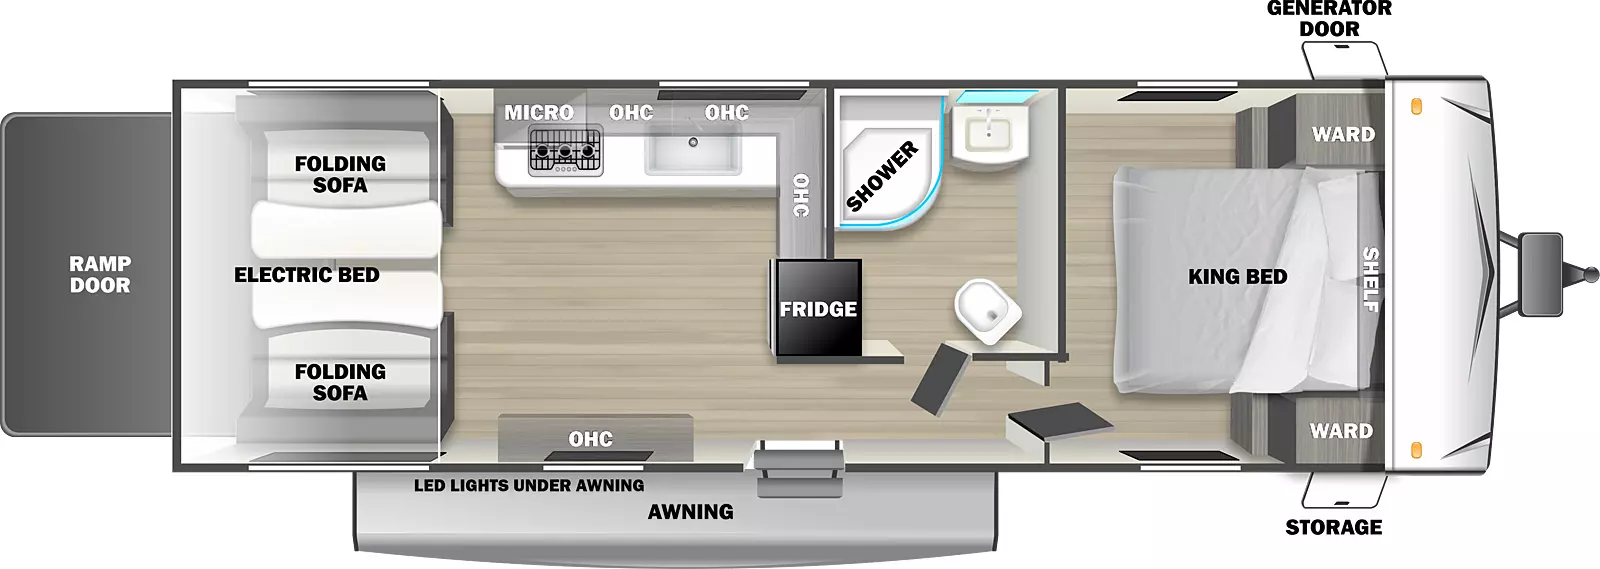 The FS2513GLE has zero slideouts and one entry. Exterior features front storage, generator, fuel station, and rear ramp door. Interior layout front to back: king bed with shelf above and wardrobes on both sides; off-door side full bathroom; entry door and door side overhead cabinet; refrigerator, overhead cabinet and kitchen counter wrap from interior wall to off-door side with sink, microwave and cooktop; rear standard electric bed, electric pass through dinettes on each side. Interior Dimensions: 13 foot cargo space; 77" from door side to kitchen counter.